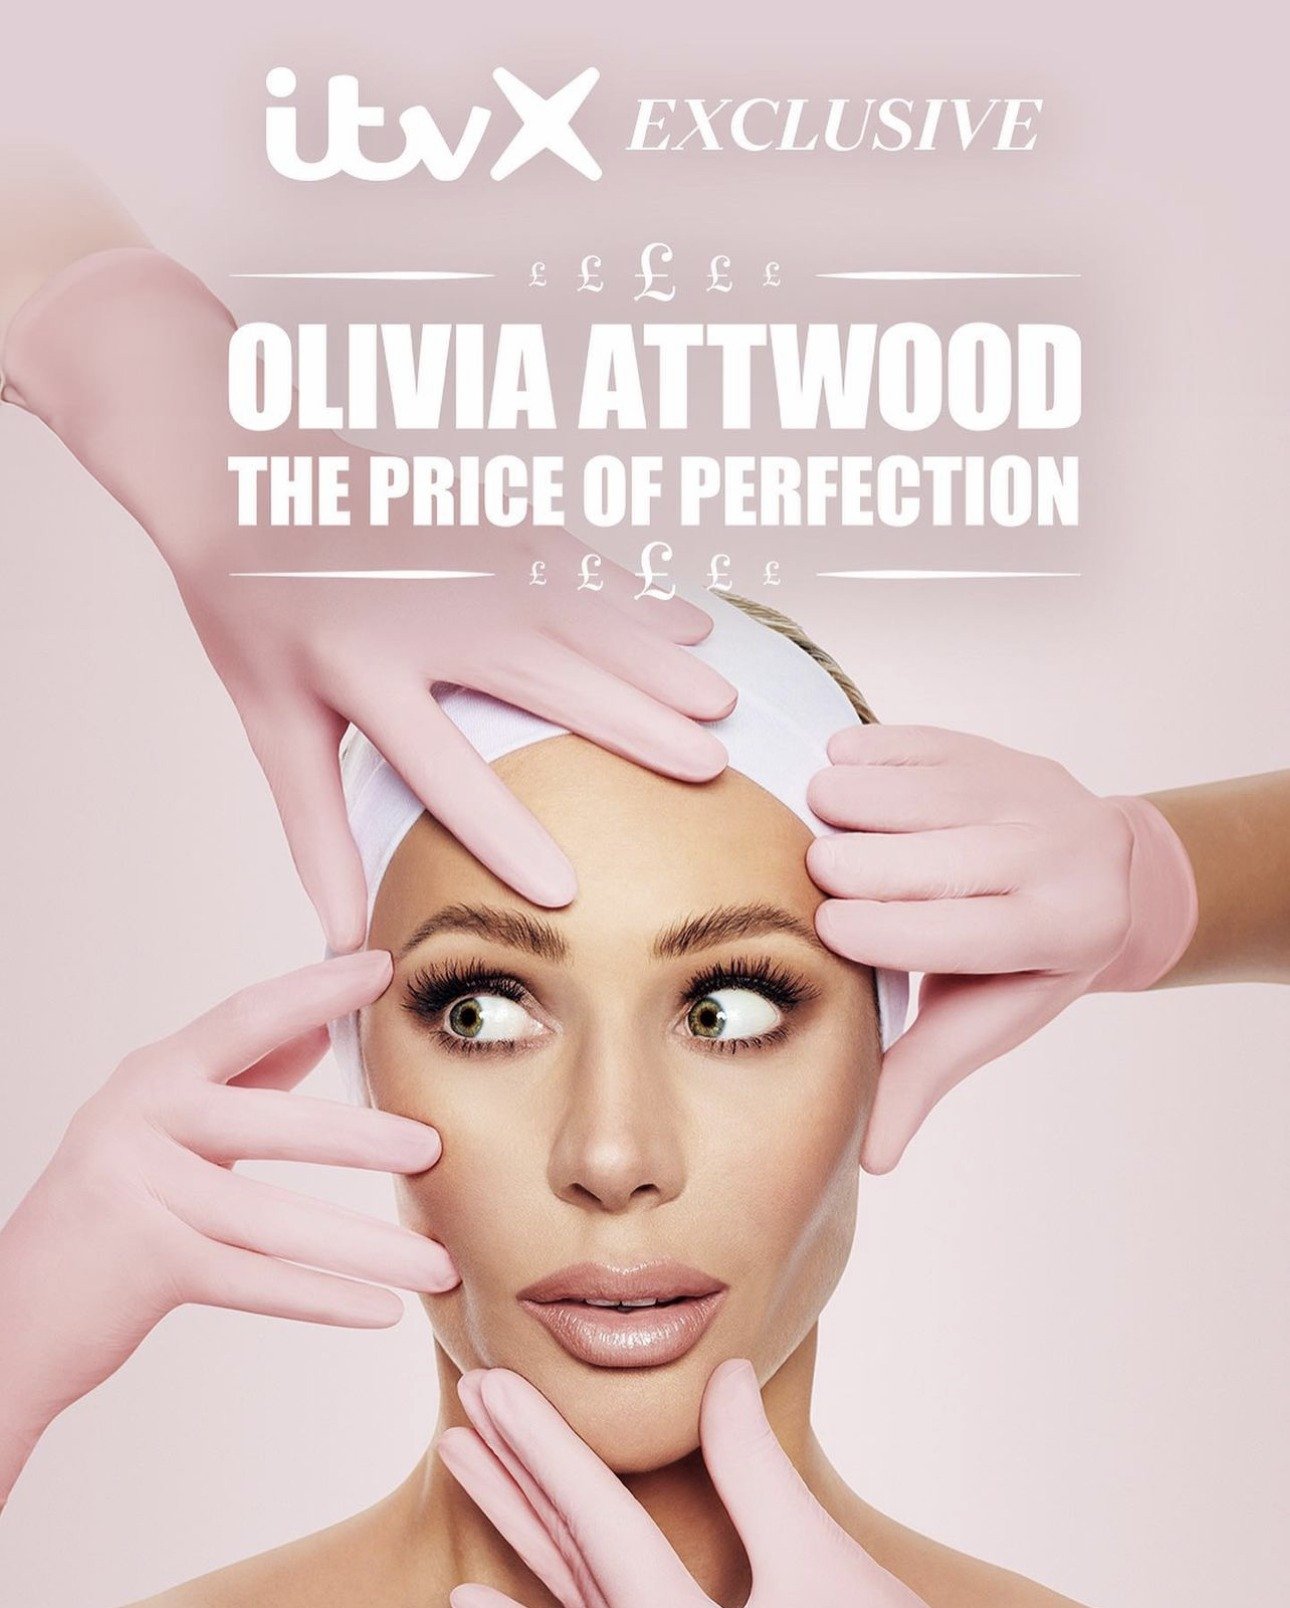 Did anyone see the @Oliviajade_attwood &lsquo;The Price of Perfect&rsquo; on @itvxoffical?

In this documentary, Olivia explores the innovative world of facial cosmetic procedures including SylfirmX (our new treatment at The Beauty House).

Tell us i